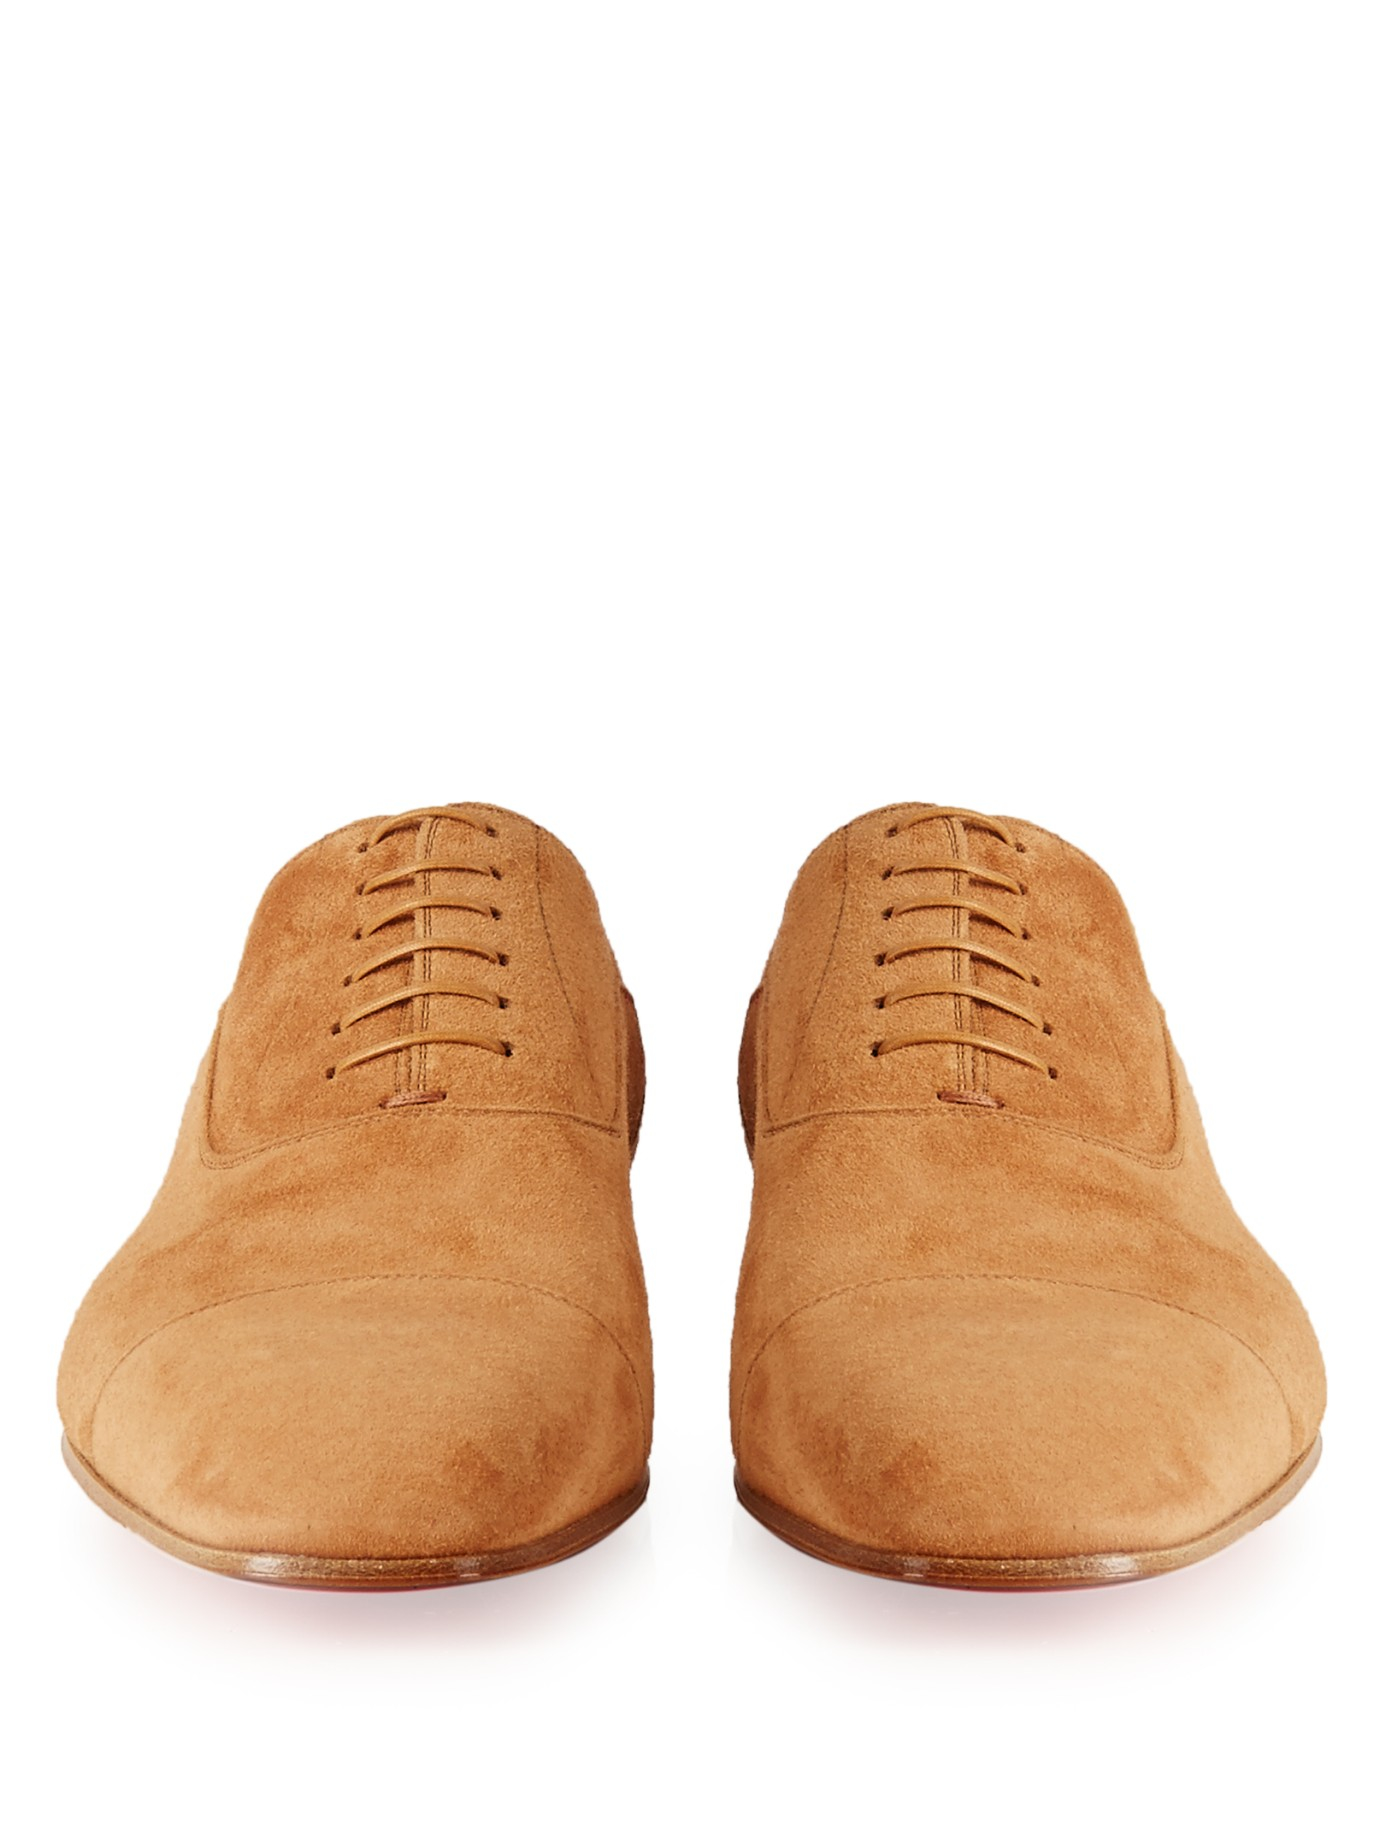 Christian Louboutin Greggo Suede Oxford Shoes in Brown for Men | Lyst